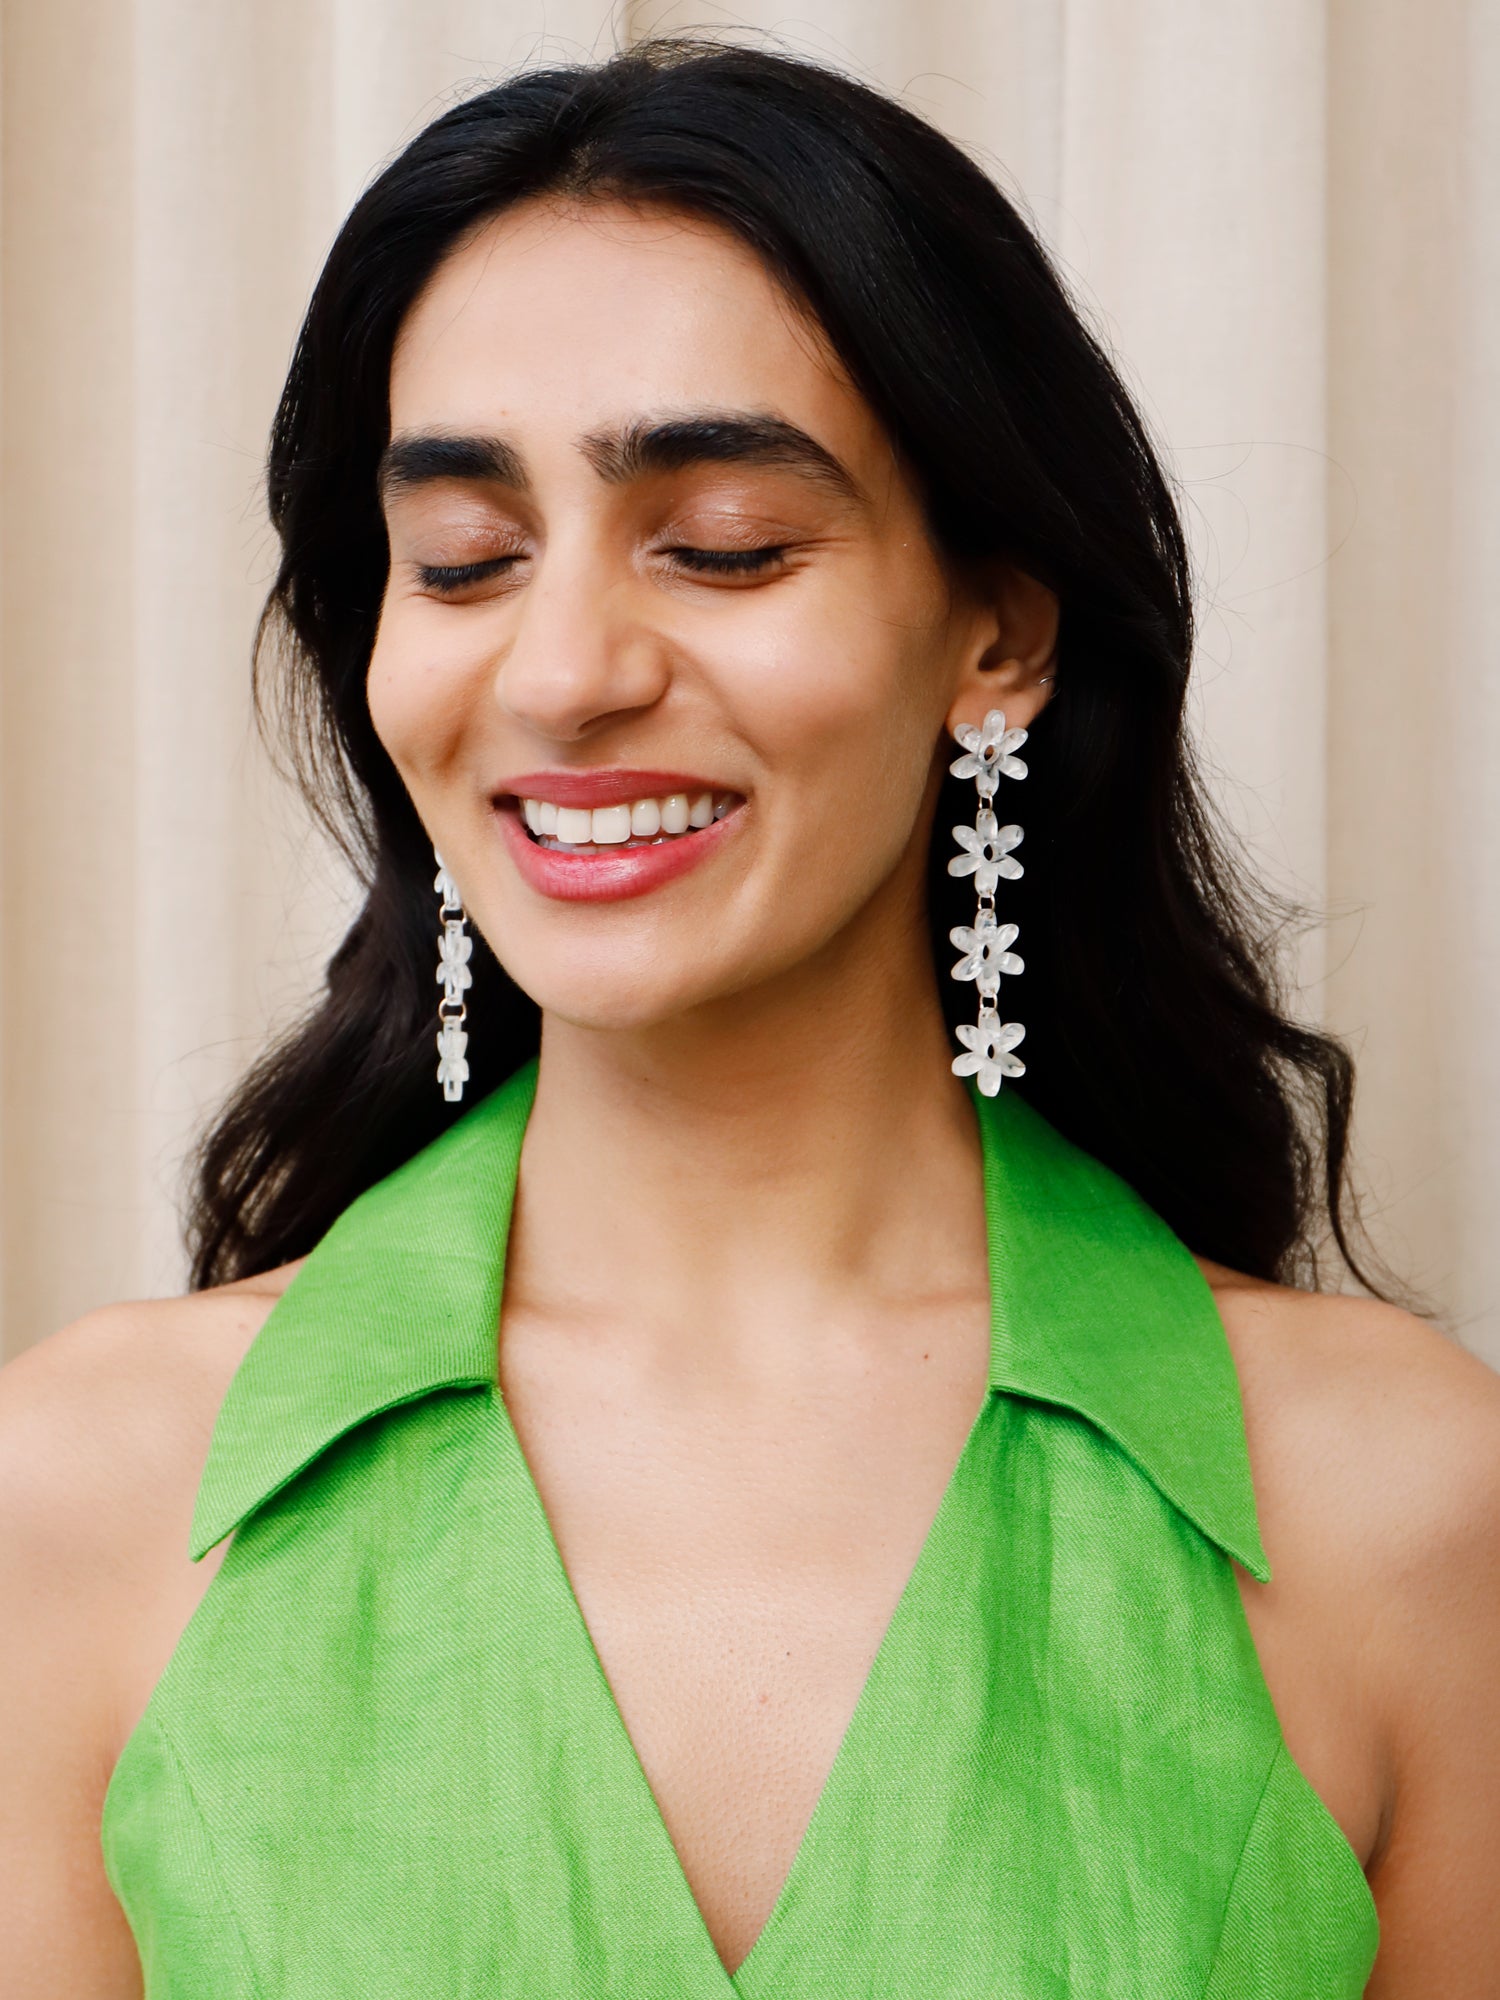 Connie Statement Earrings in Off White